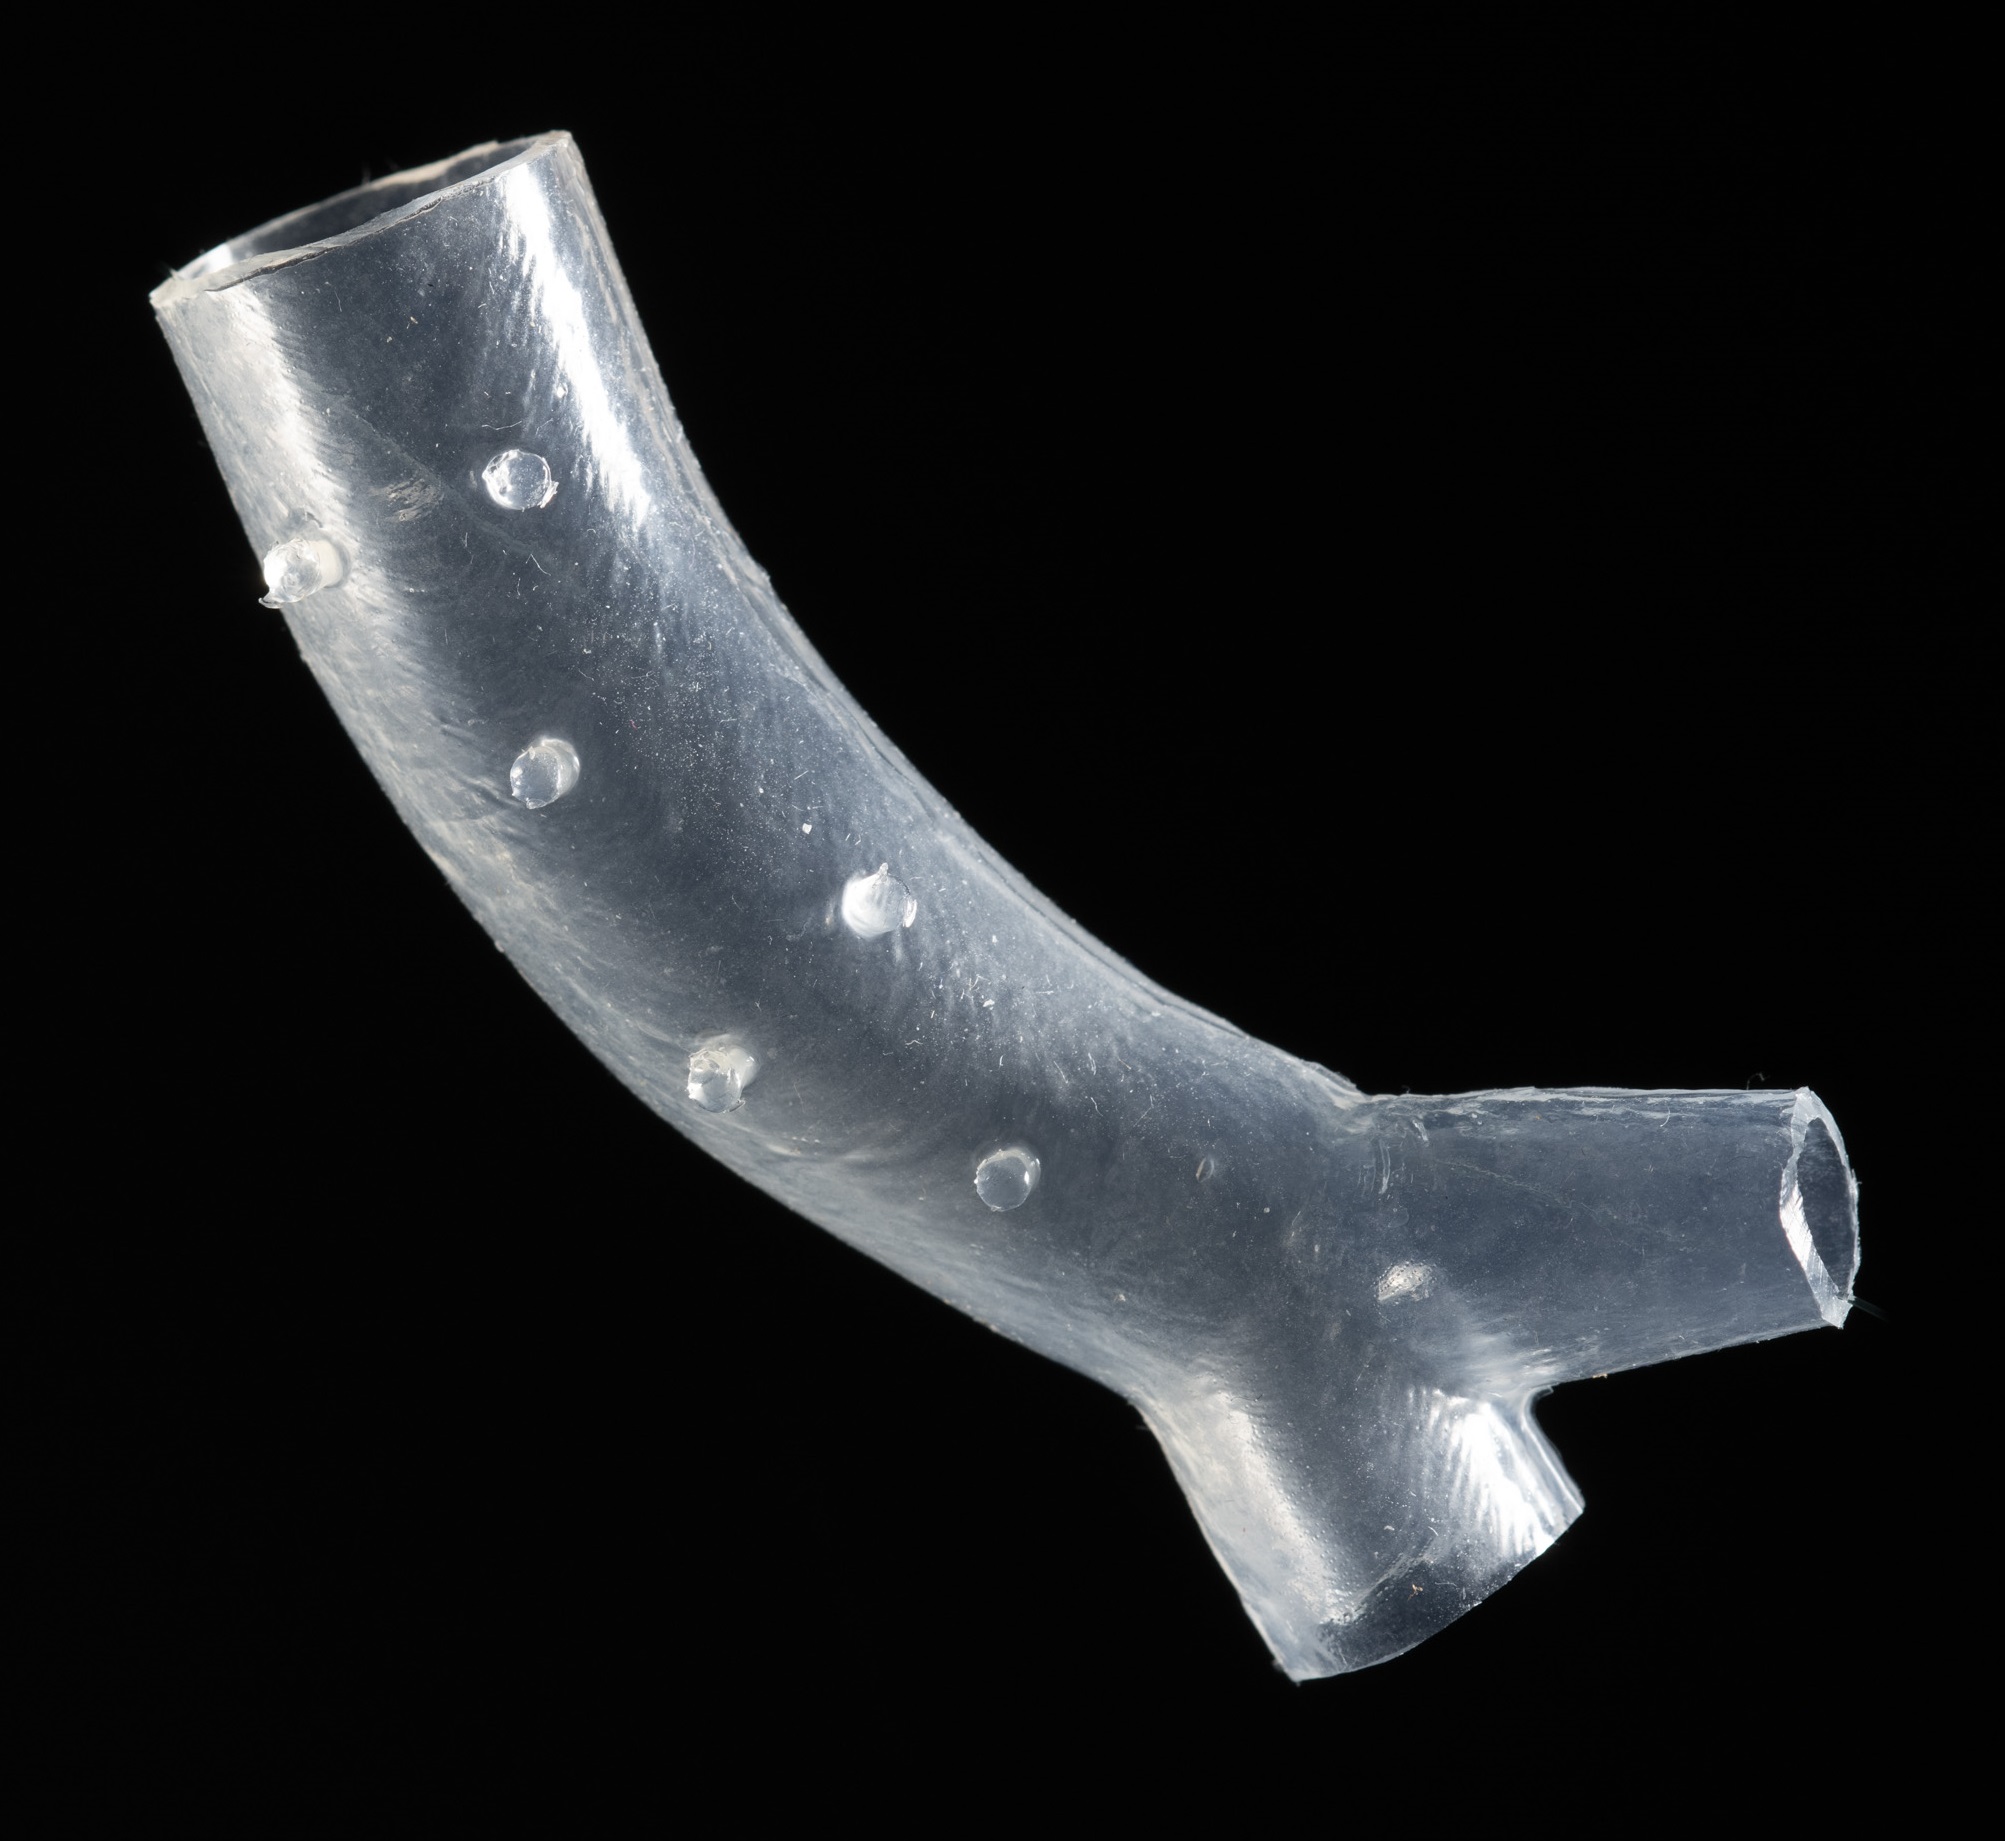 3D Printed Patient-specific Airway Stents Receive FDA Approval